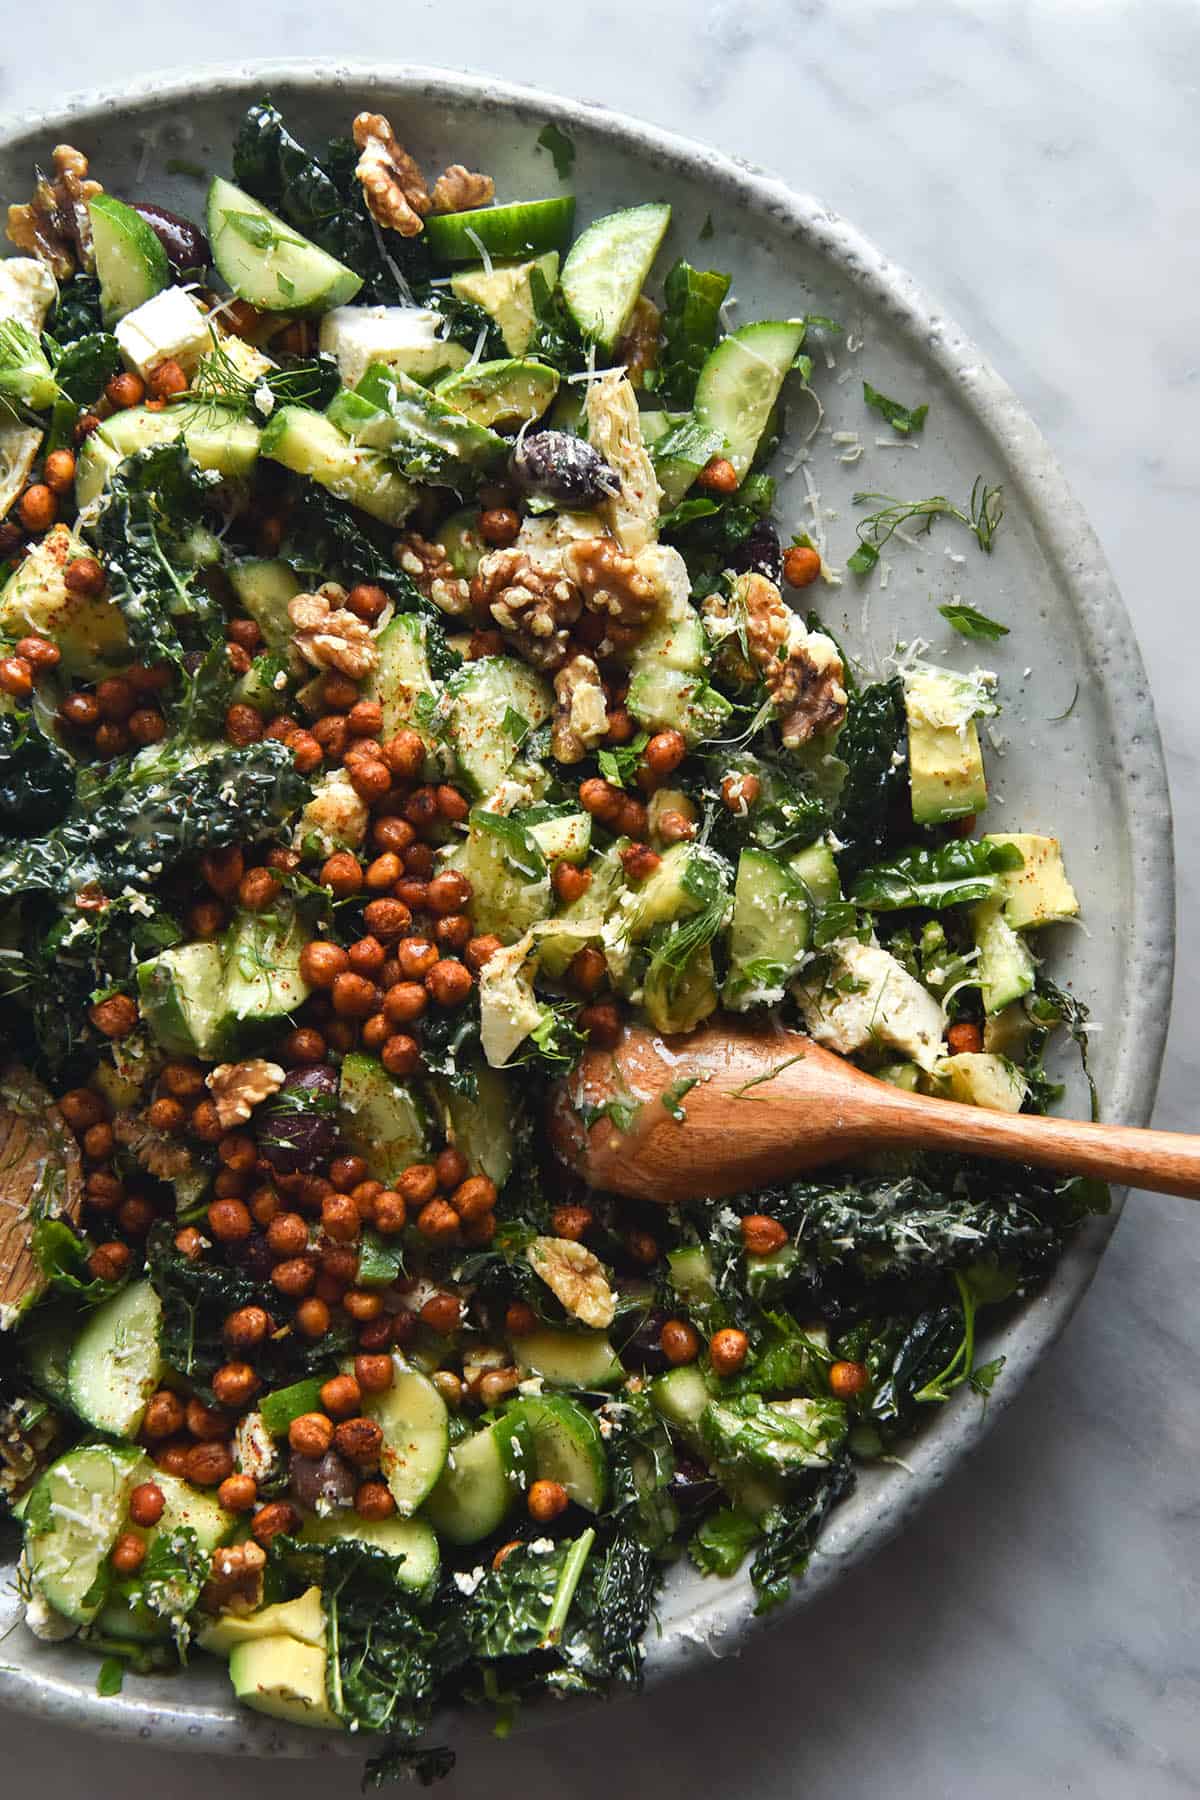 A close up aerial image of a kale salad with crispy chickpeas, cucumber, olives, walnuts, avocado and a zingy mustard herb dressing. The salad is topped with grated parmesan and sits atop a large white ceramic serving plate on a white marble table.